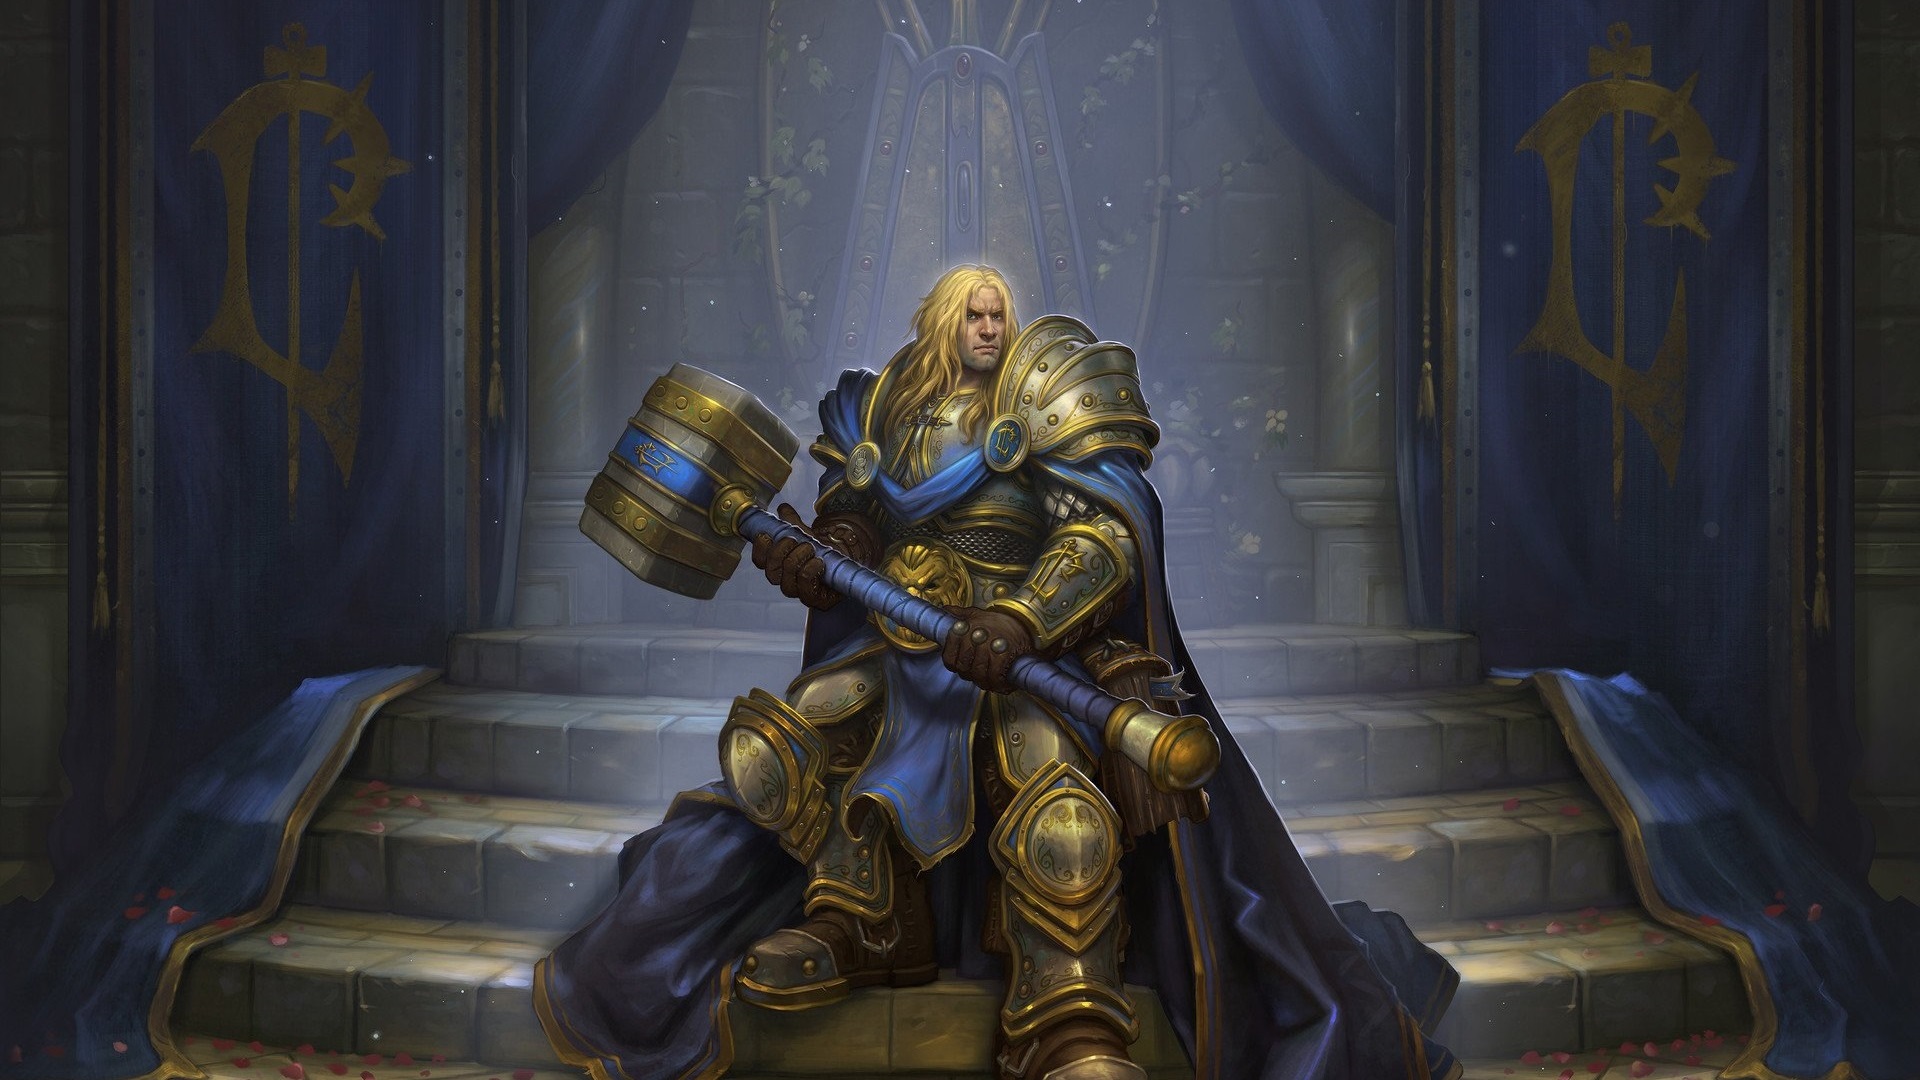 Arthas, Arthas Menethil, Hearthstone: Heroes of Warcraft, Warcraft, Warcraft III: Reign of Chaos, Prince, Video games Wallpaper HD / Desktop and Mobile Background